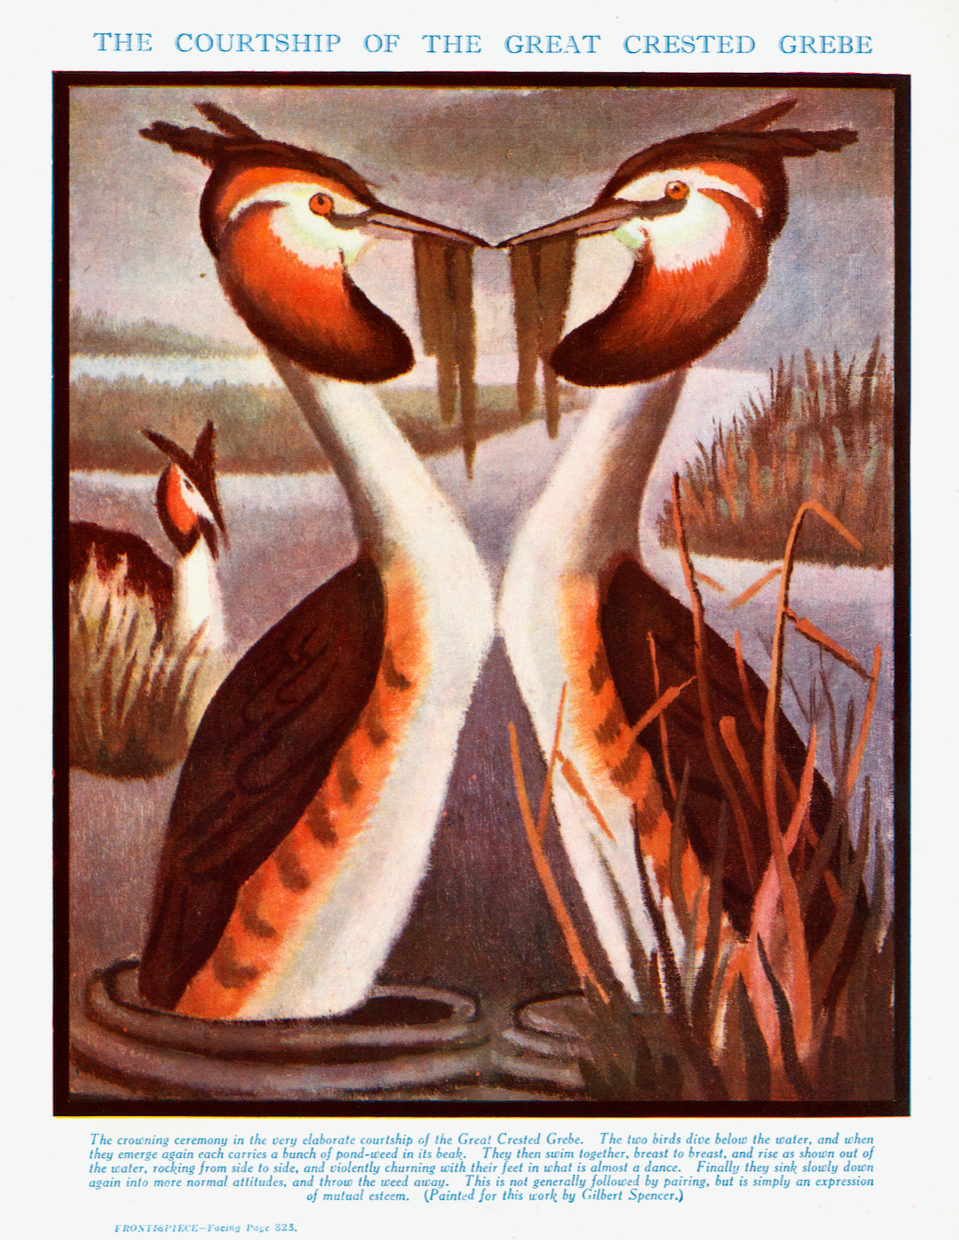 Cover of ‘The Courtship of the Great Crested Grebe’, watercolour by Gilbert Spencer, in H. G. Wells, Julian Huxley and G. P. Wells, The Science of Life, vol. III (London: Waverley, 1931), 823.